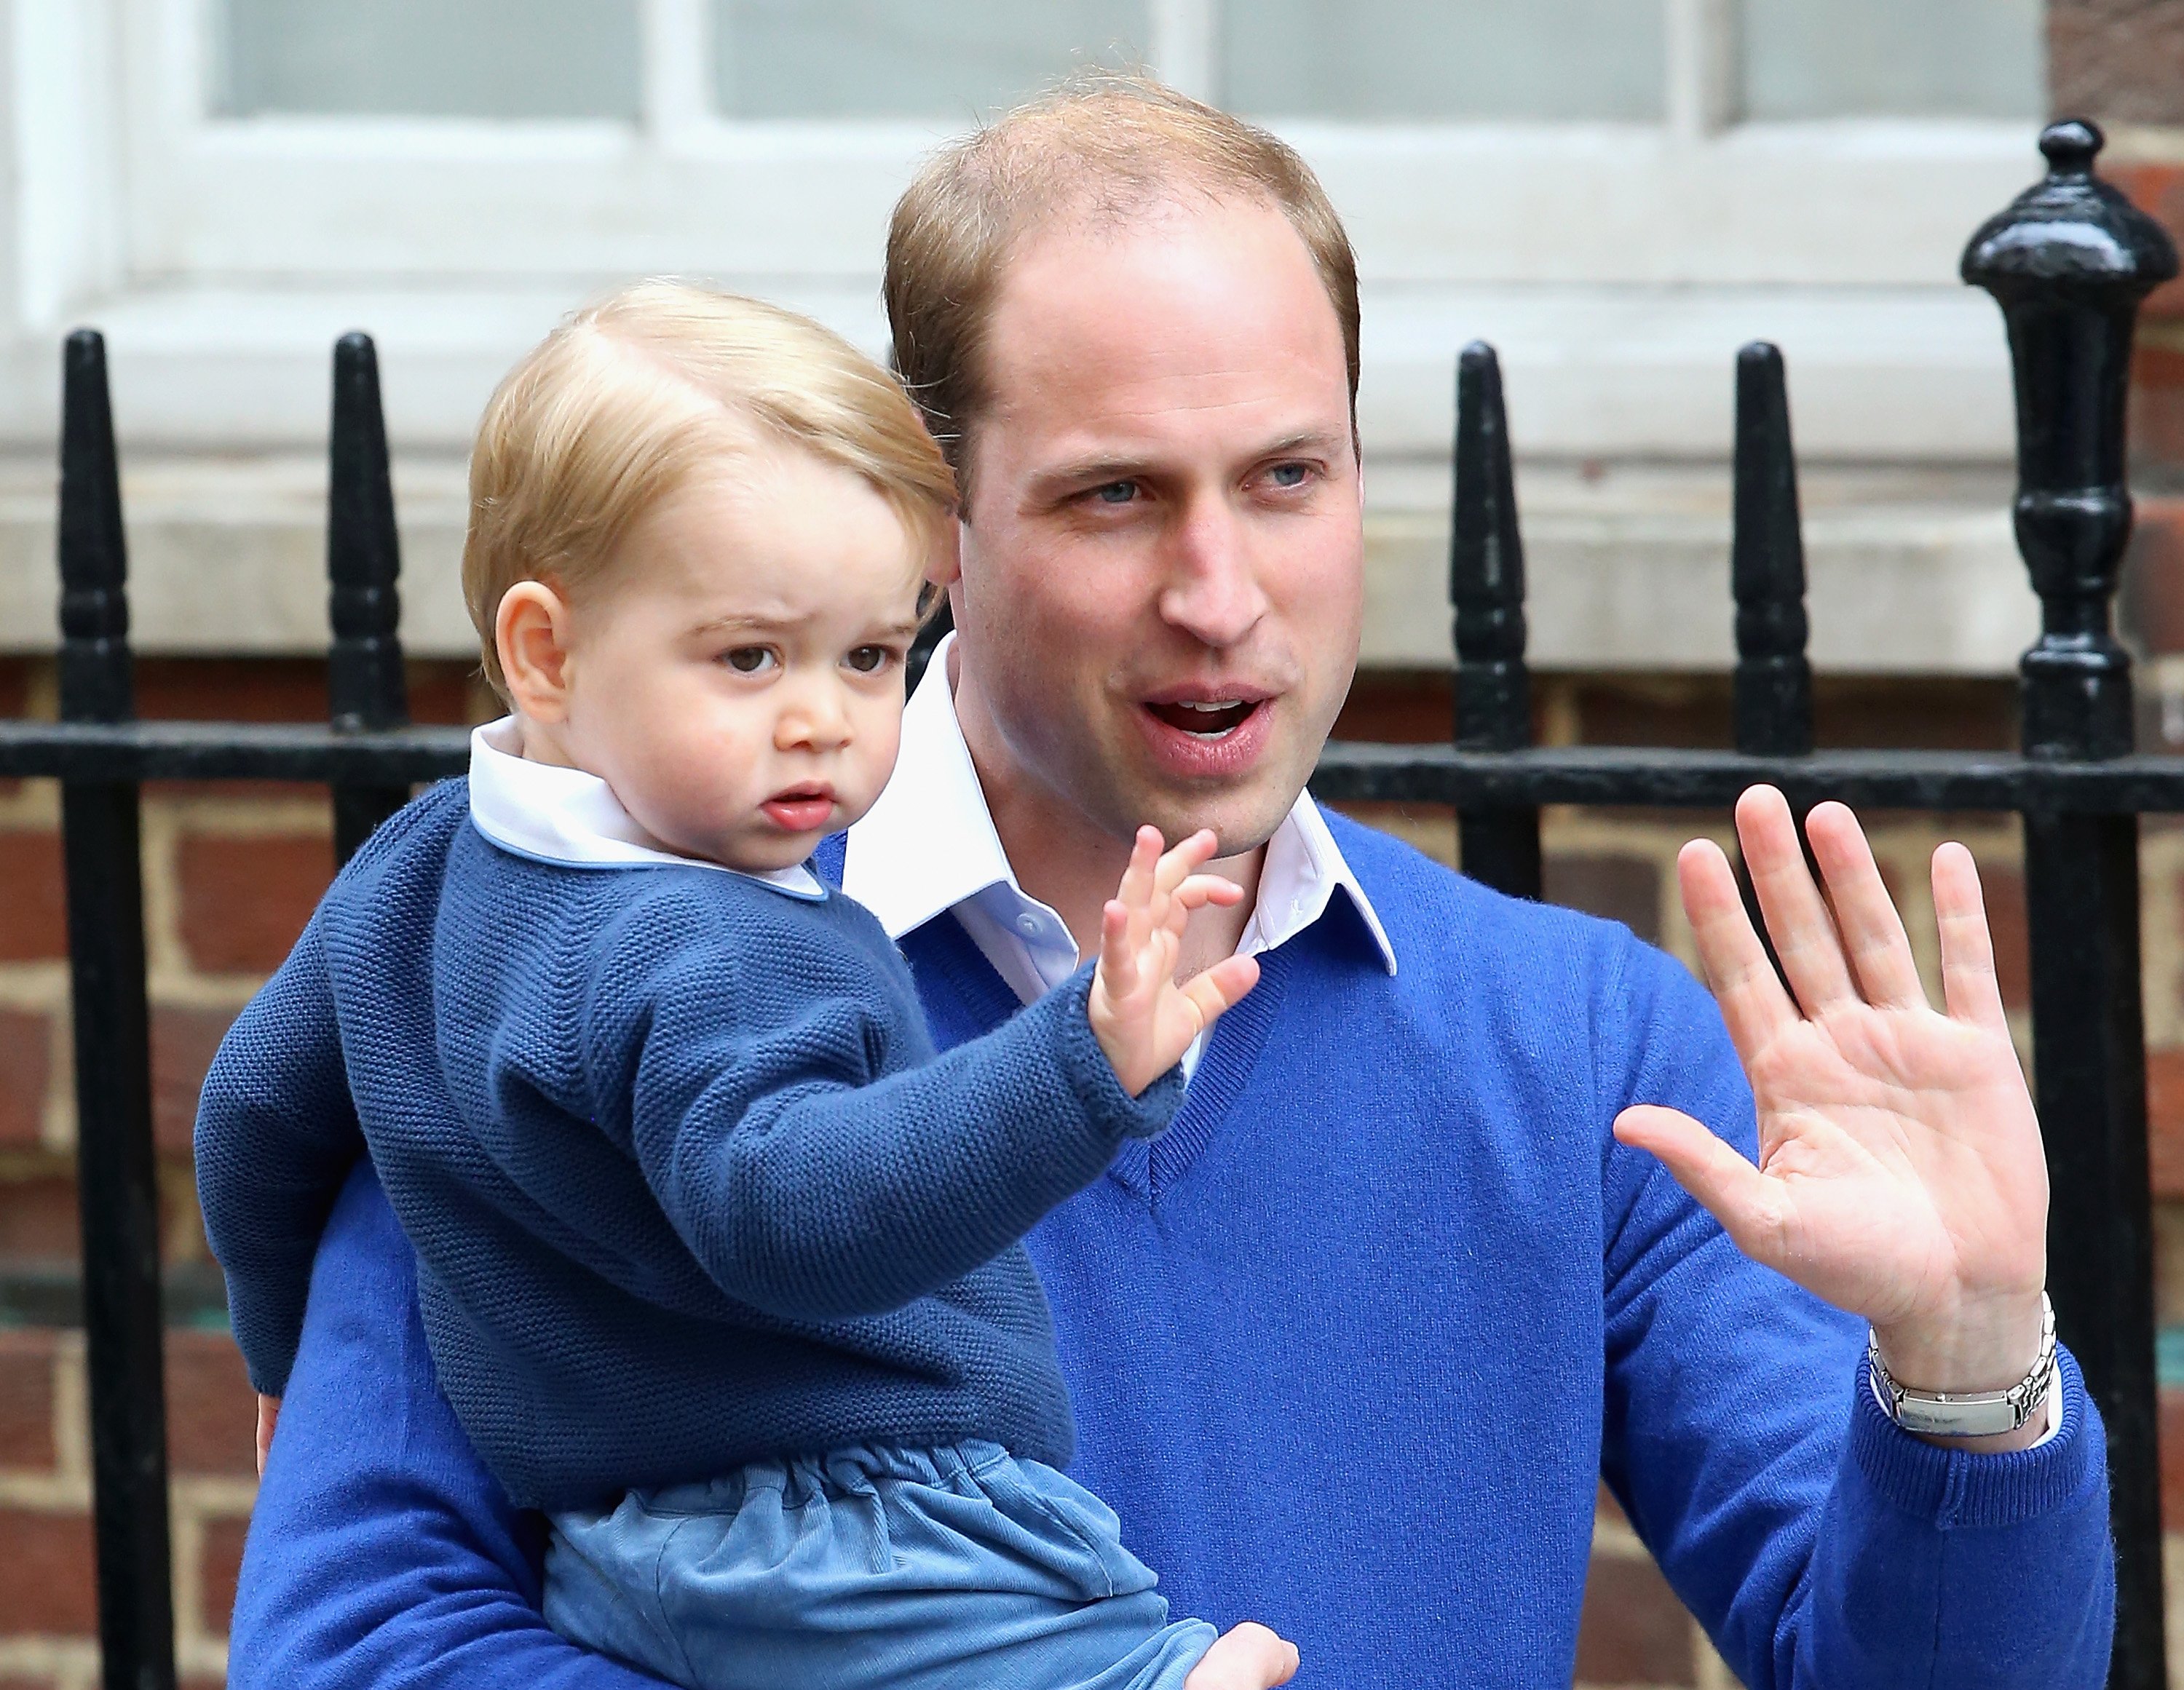 Prince William and Prince George at the Lindo Wing after Catherine gave birth to Princess Charlotte at St Mary's Hospital on May 2, 2015 in London, England. | Source: Getty Images